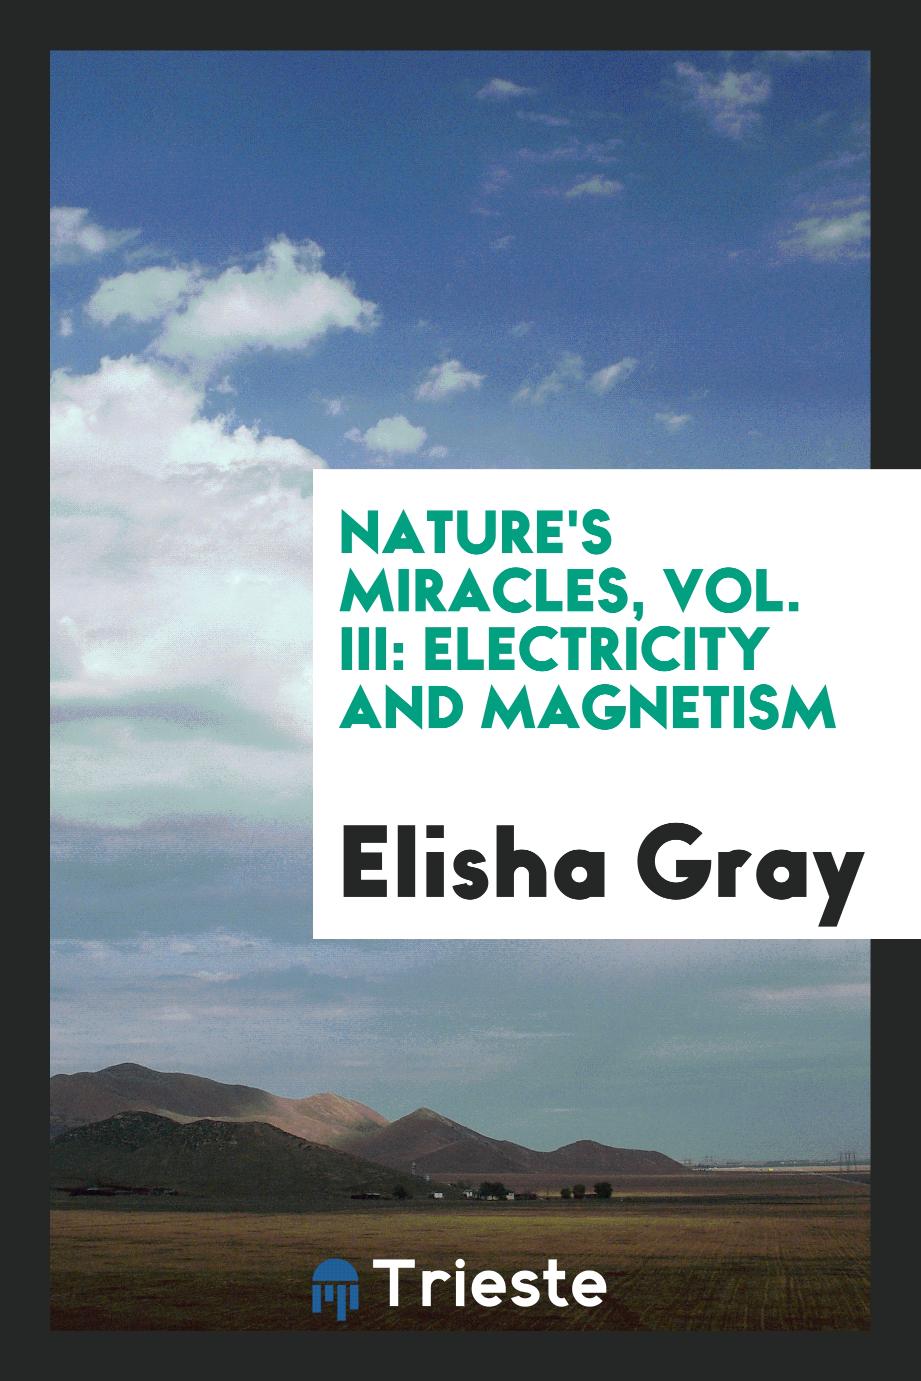 Nature's miracles, Vol. III: Electricity and Magnetism